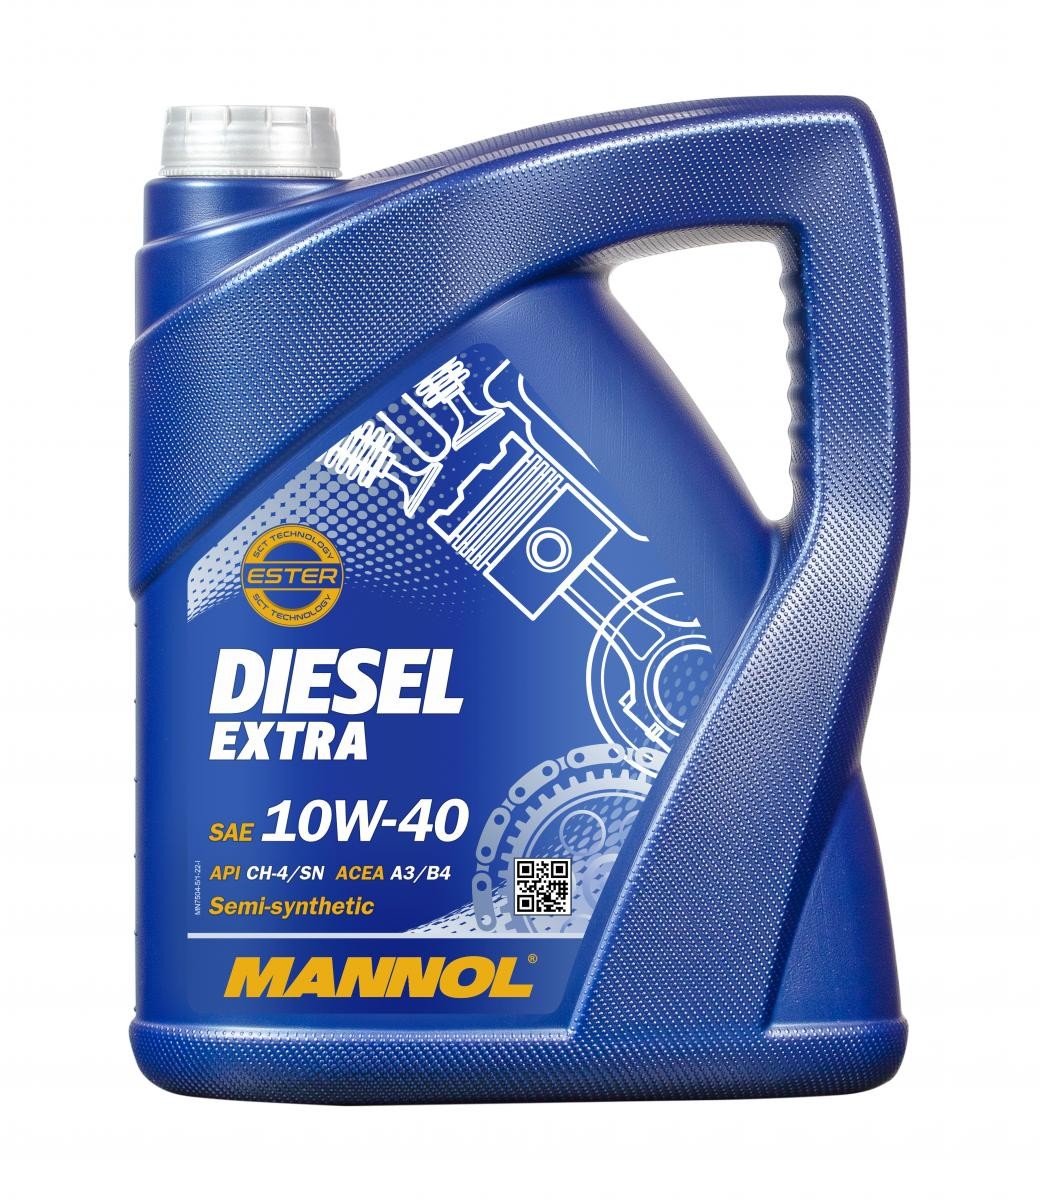 MANNOL DIESEL EXTRA MN7504-5 Engine oil 10W-40, 5l, Part Synthetic Oil